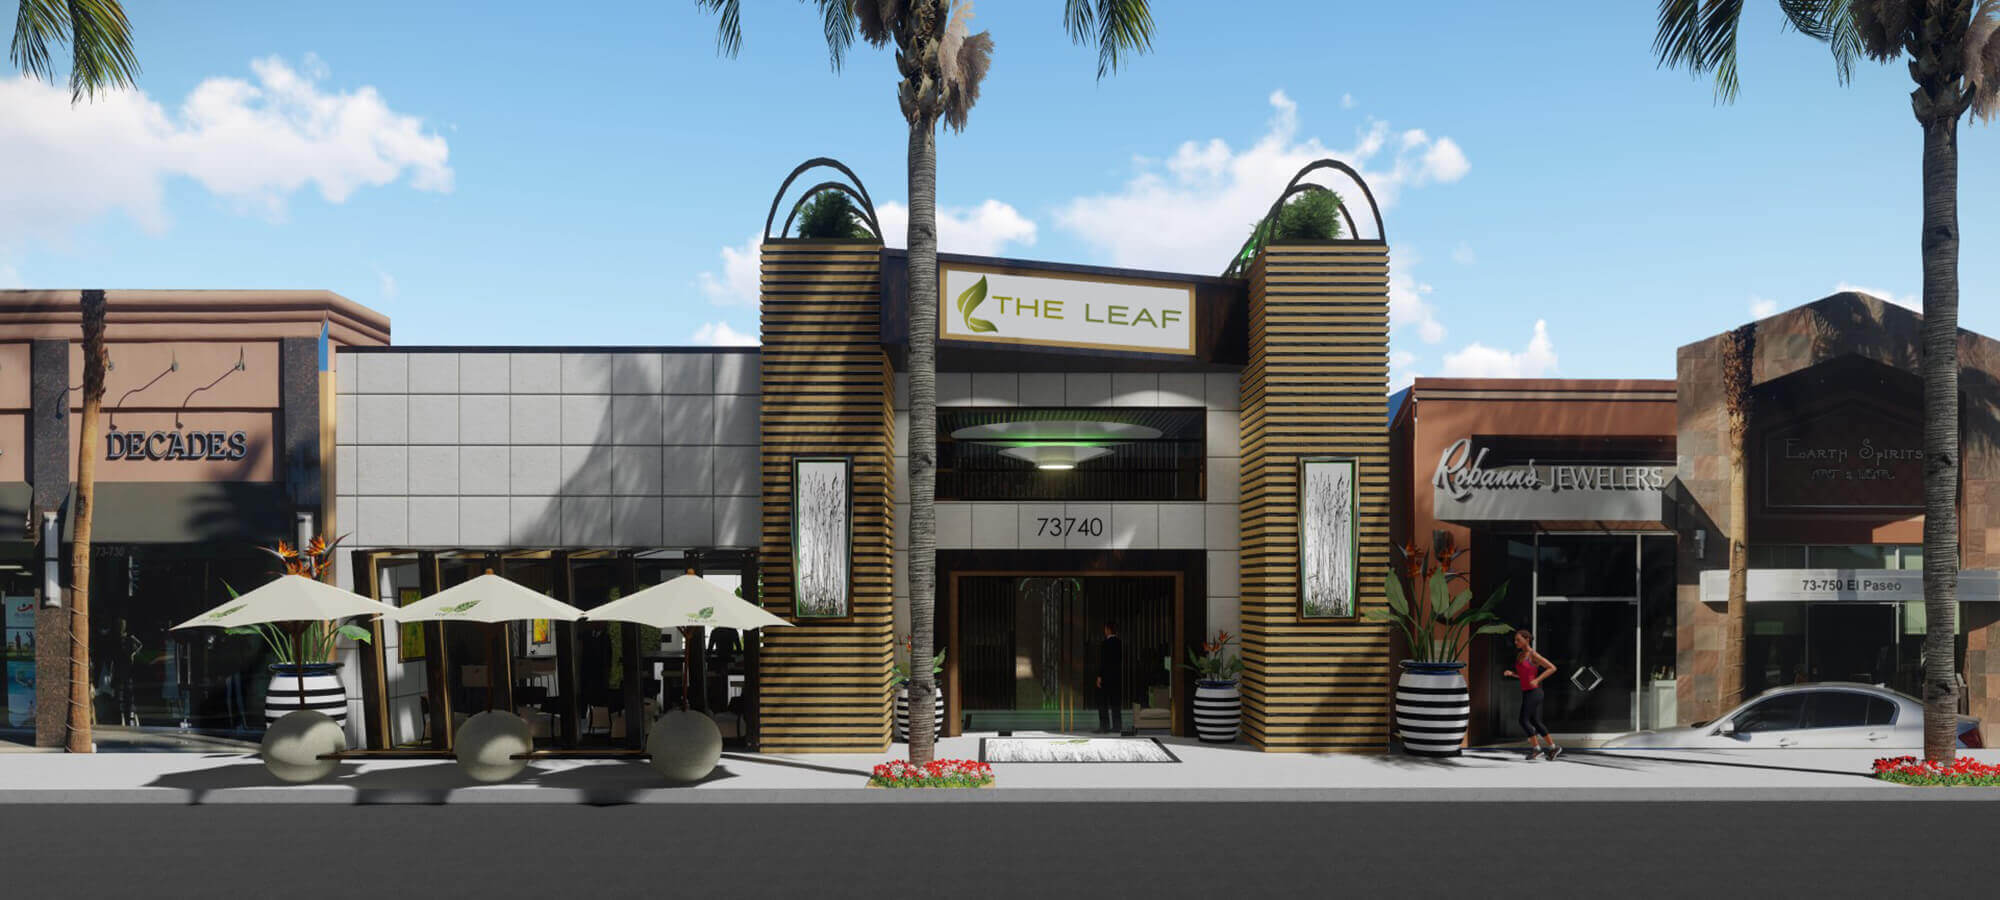 The Leaf El Paseo: Bringing Rodeo Drive to the Desert